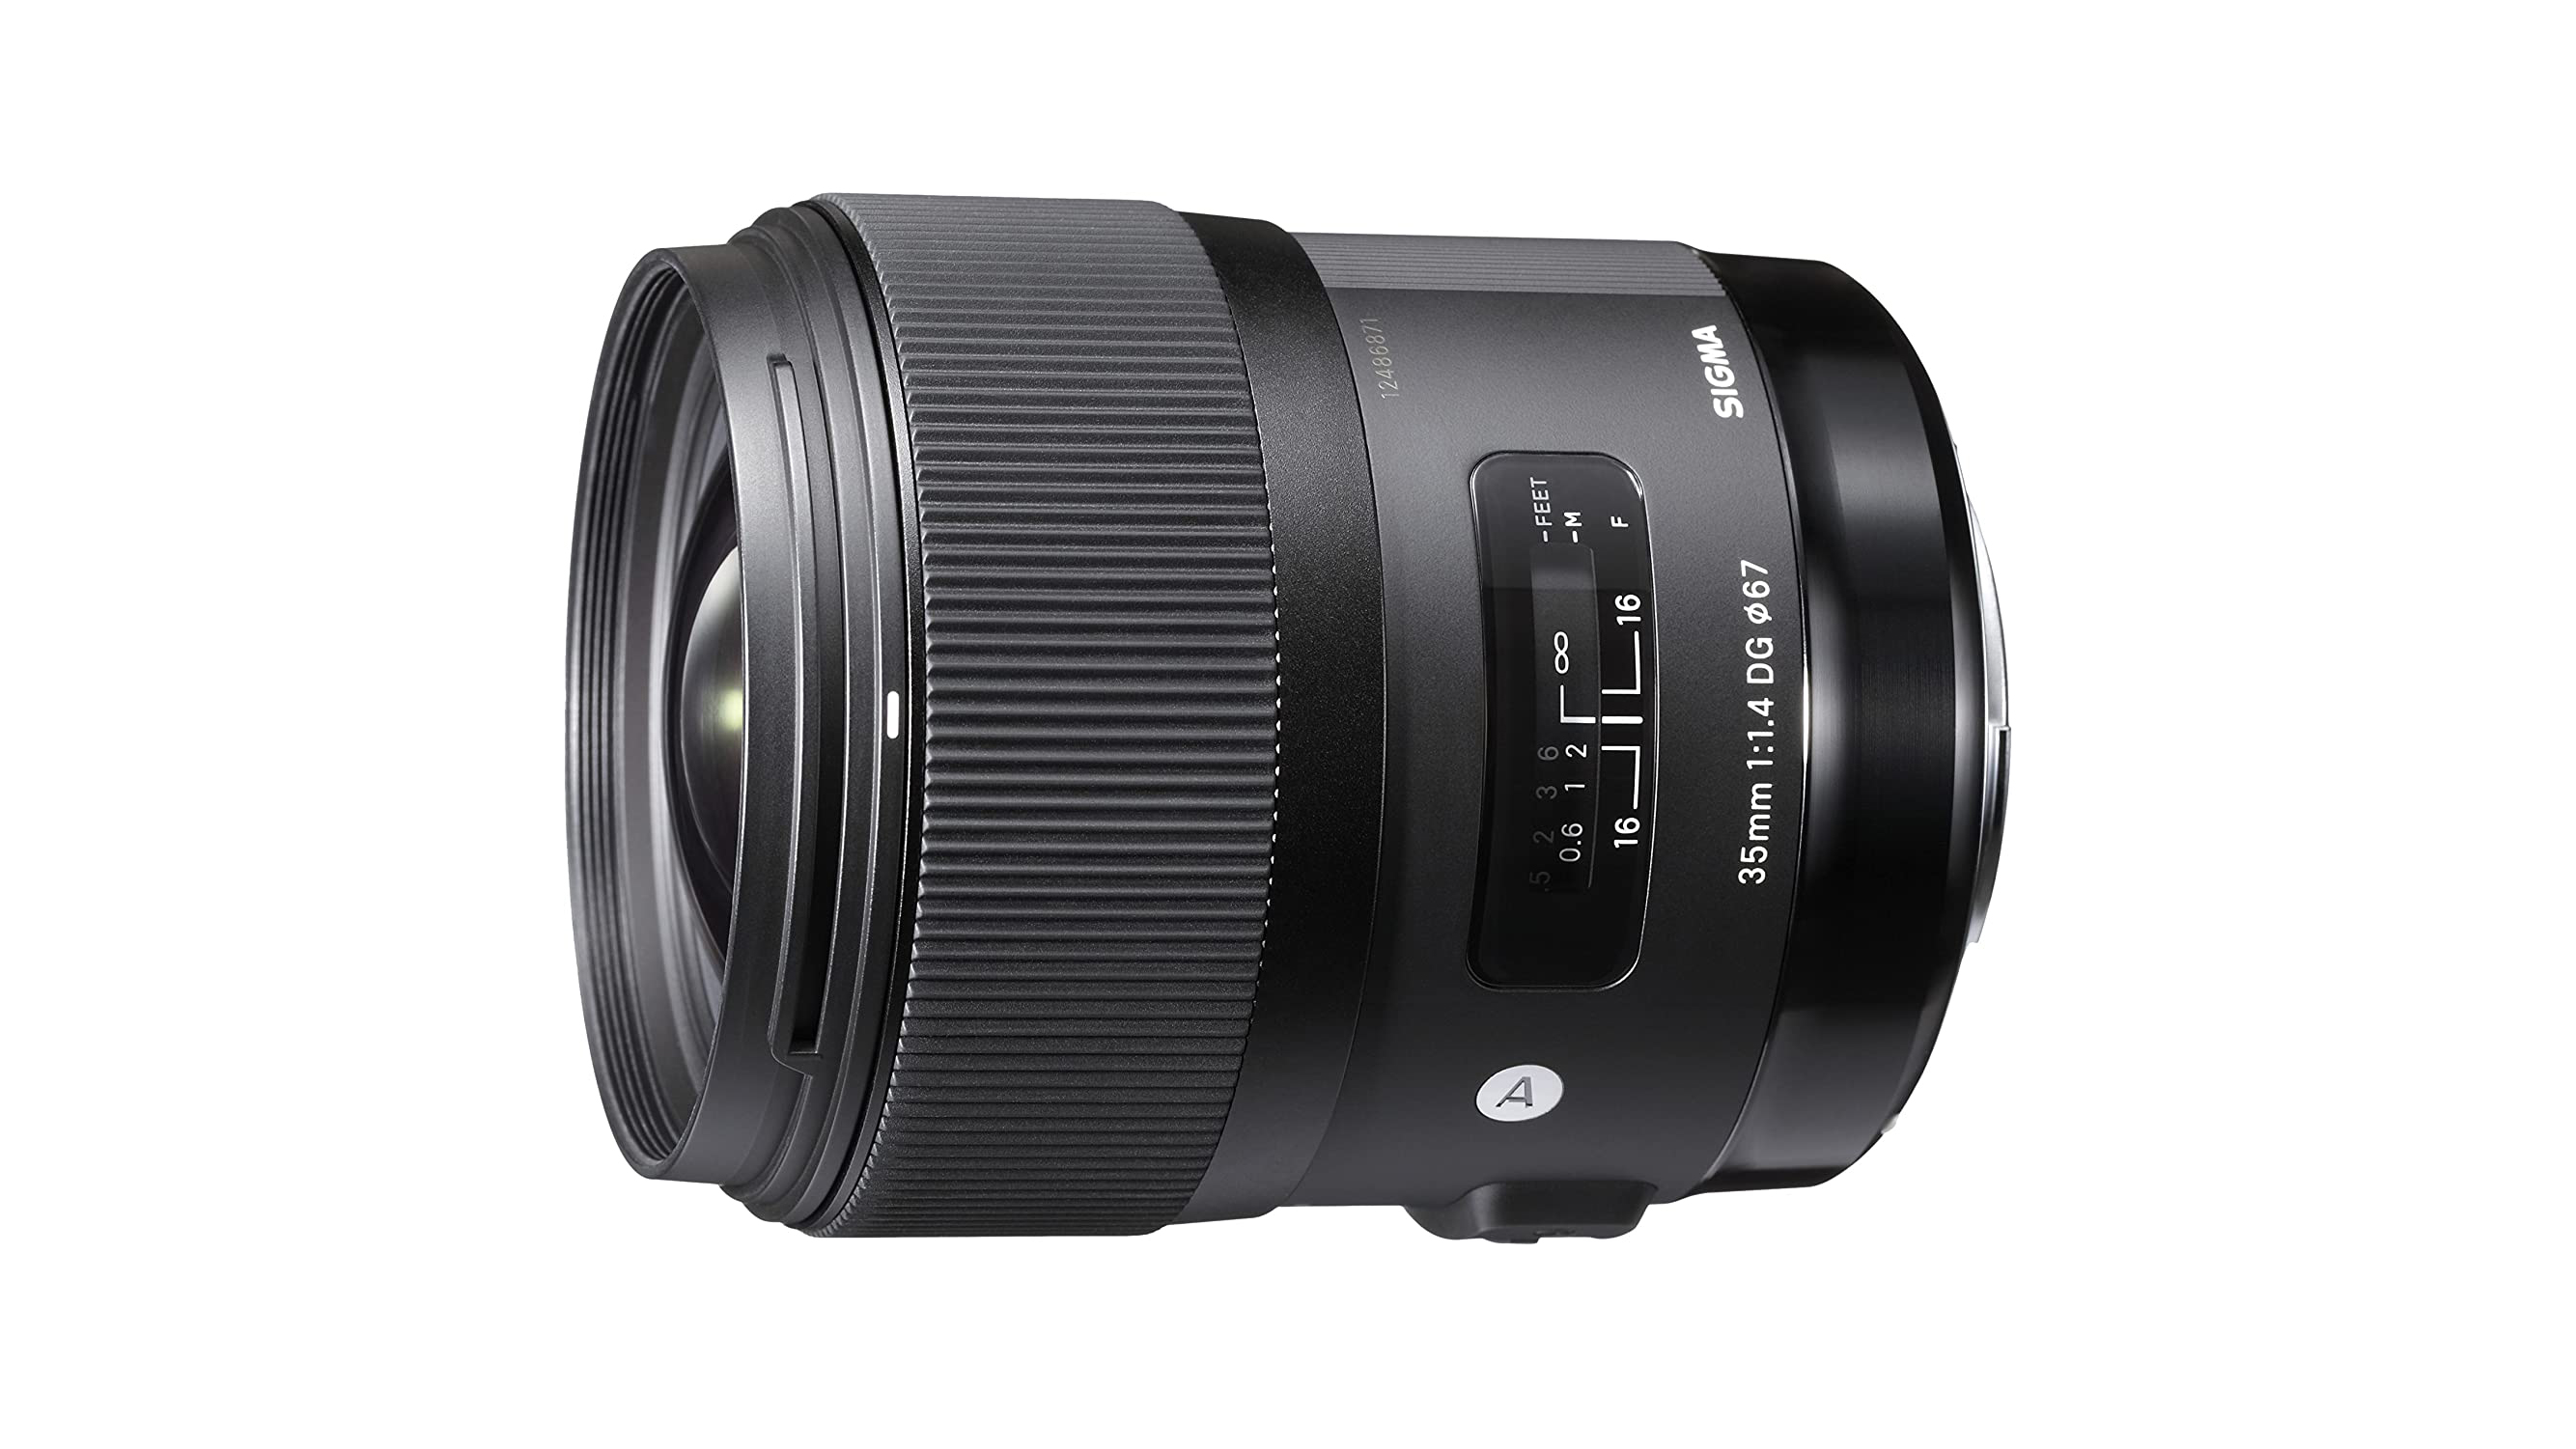 Best lens for street photography: Sigma 35mm f/1.4 DG HSM | A